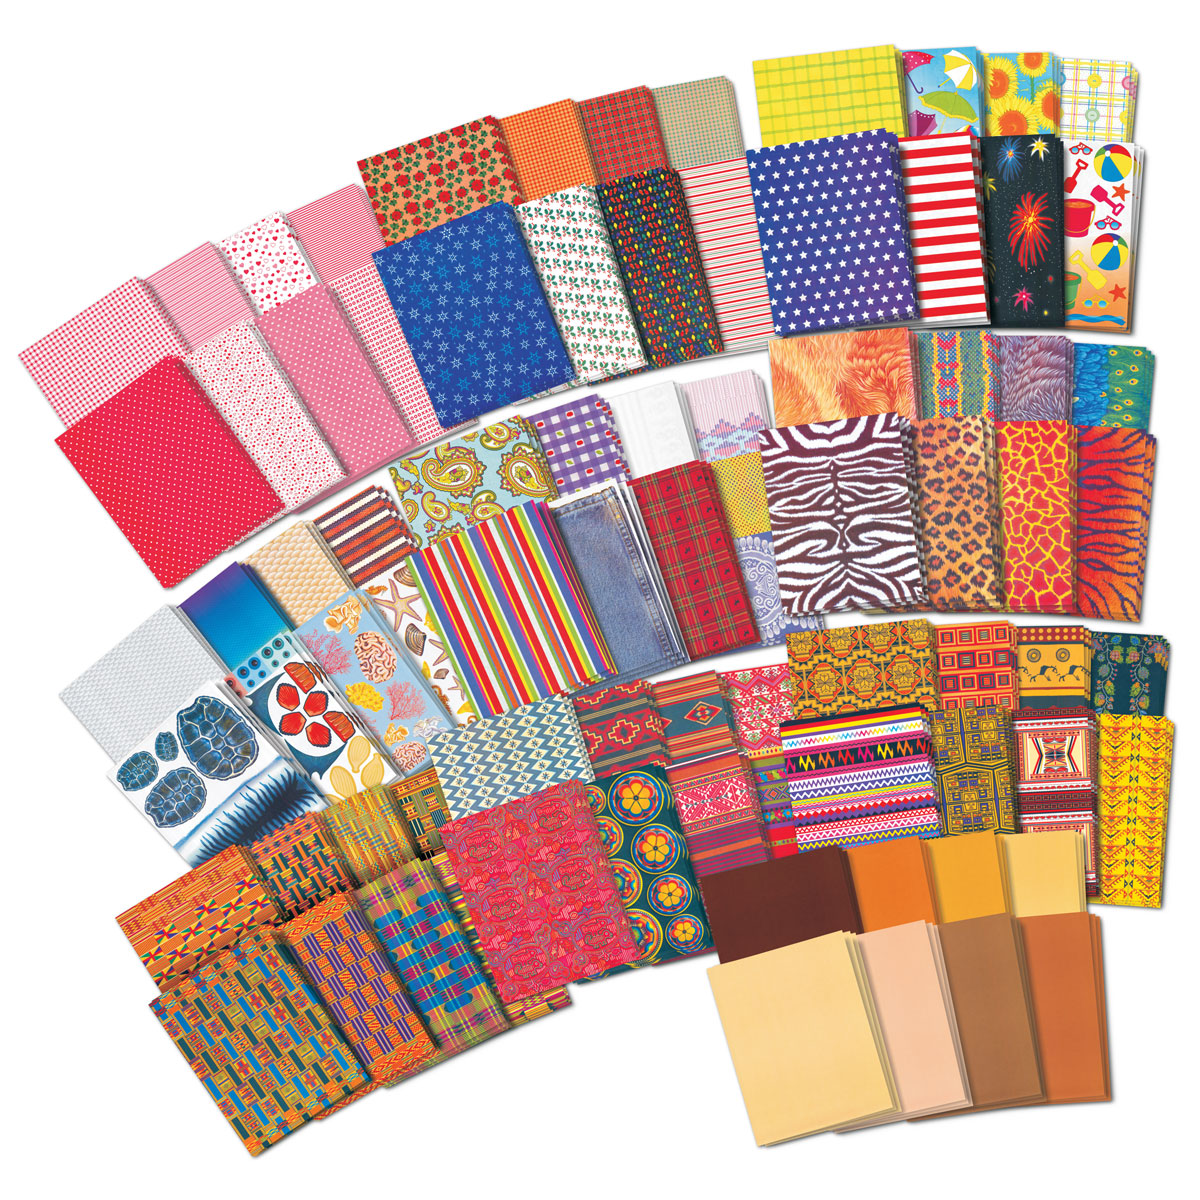 Patterned Paper Class Pack